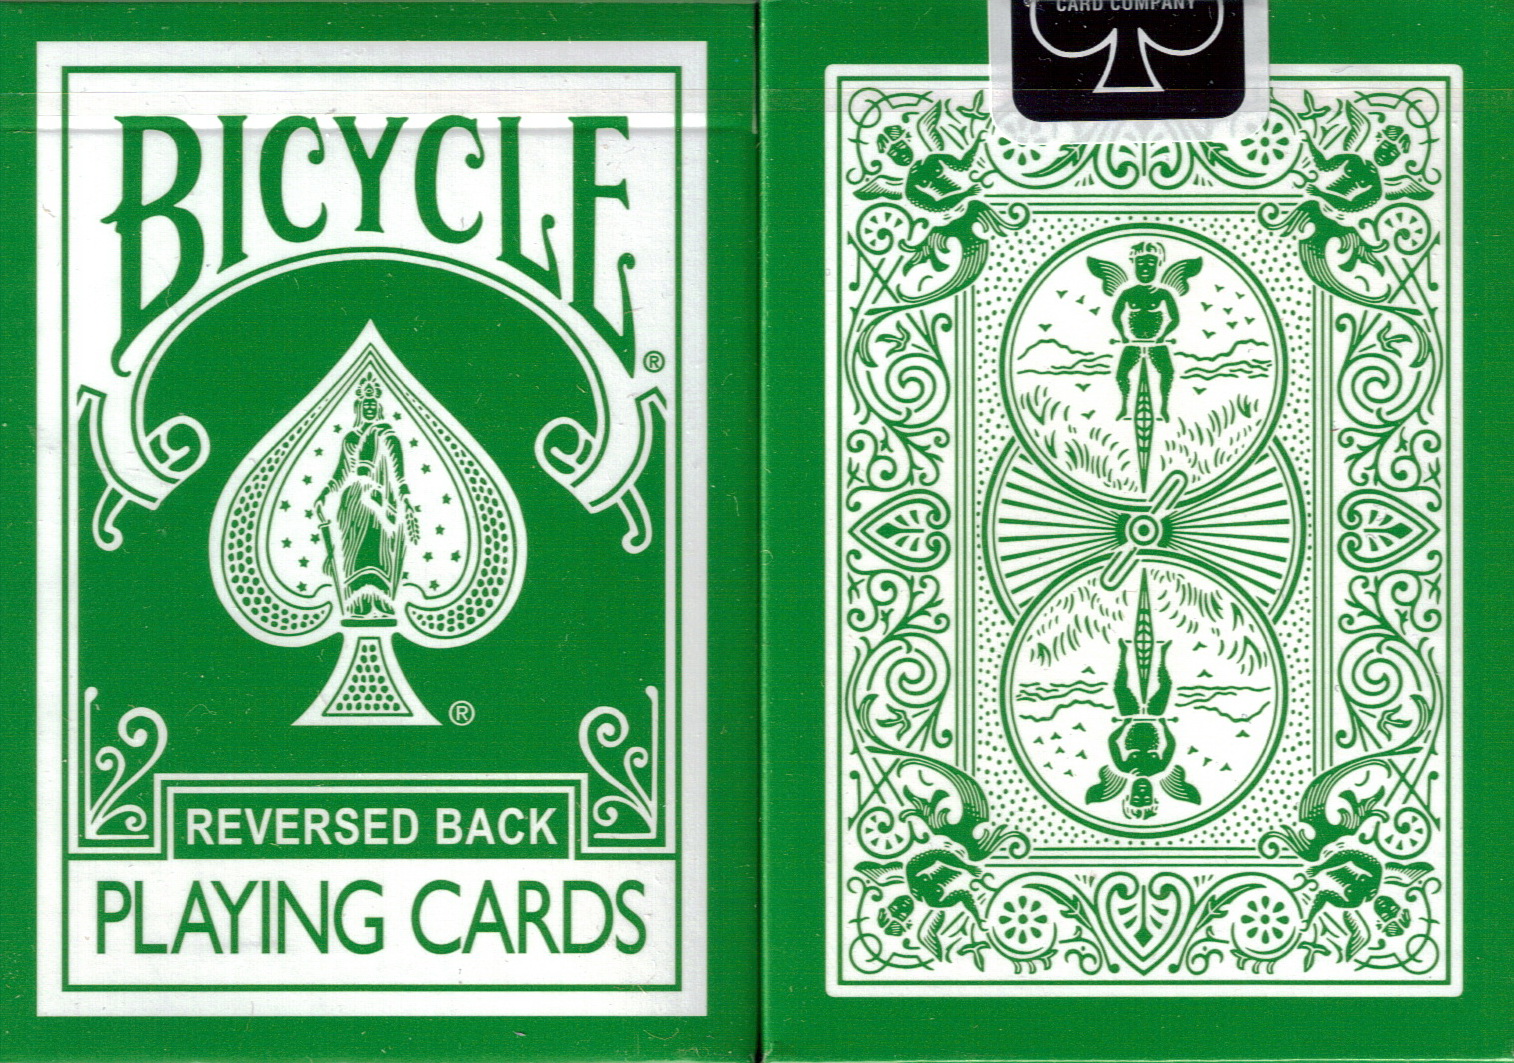 card and a double blank card the stock is traditional bicycle and the ...